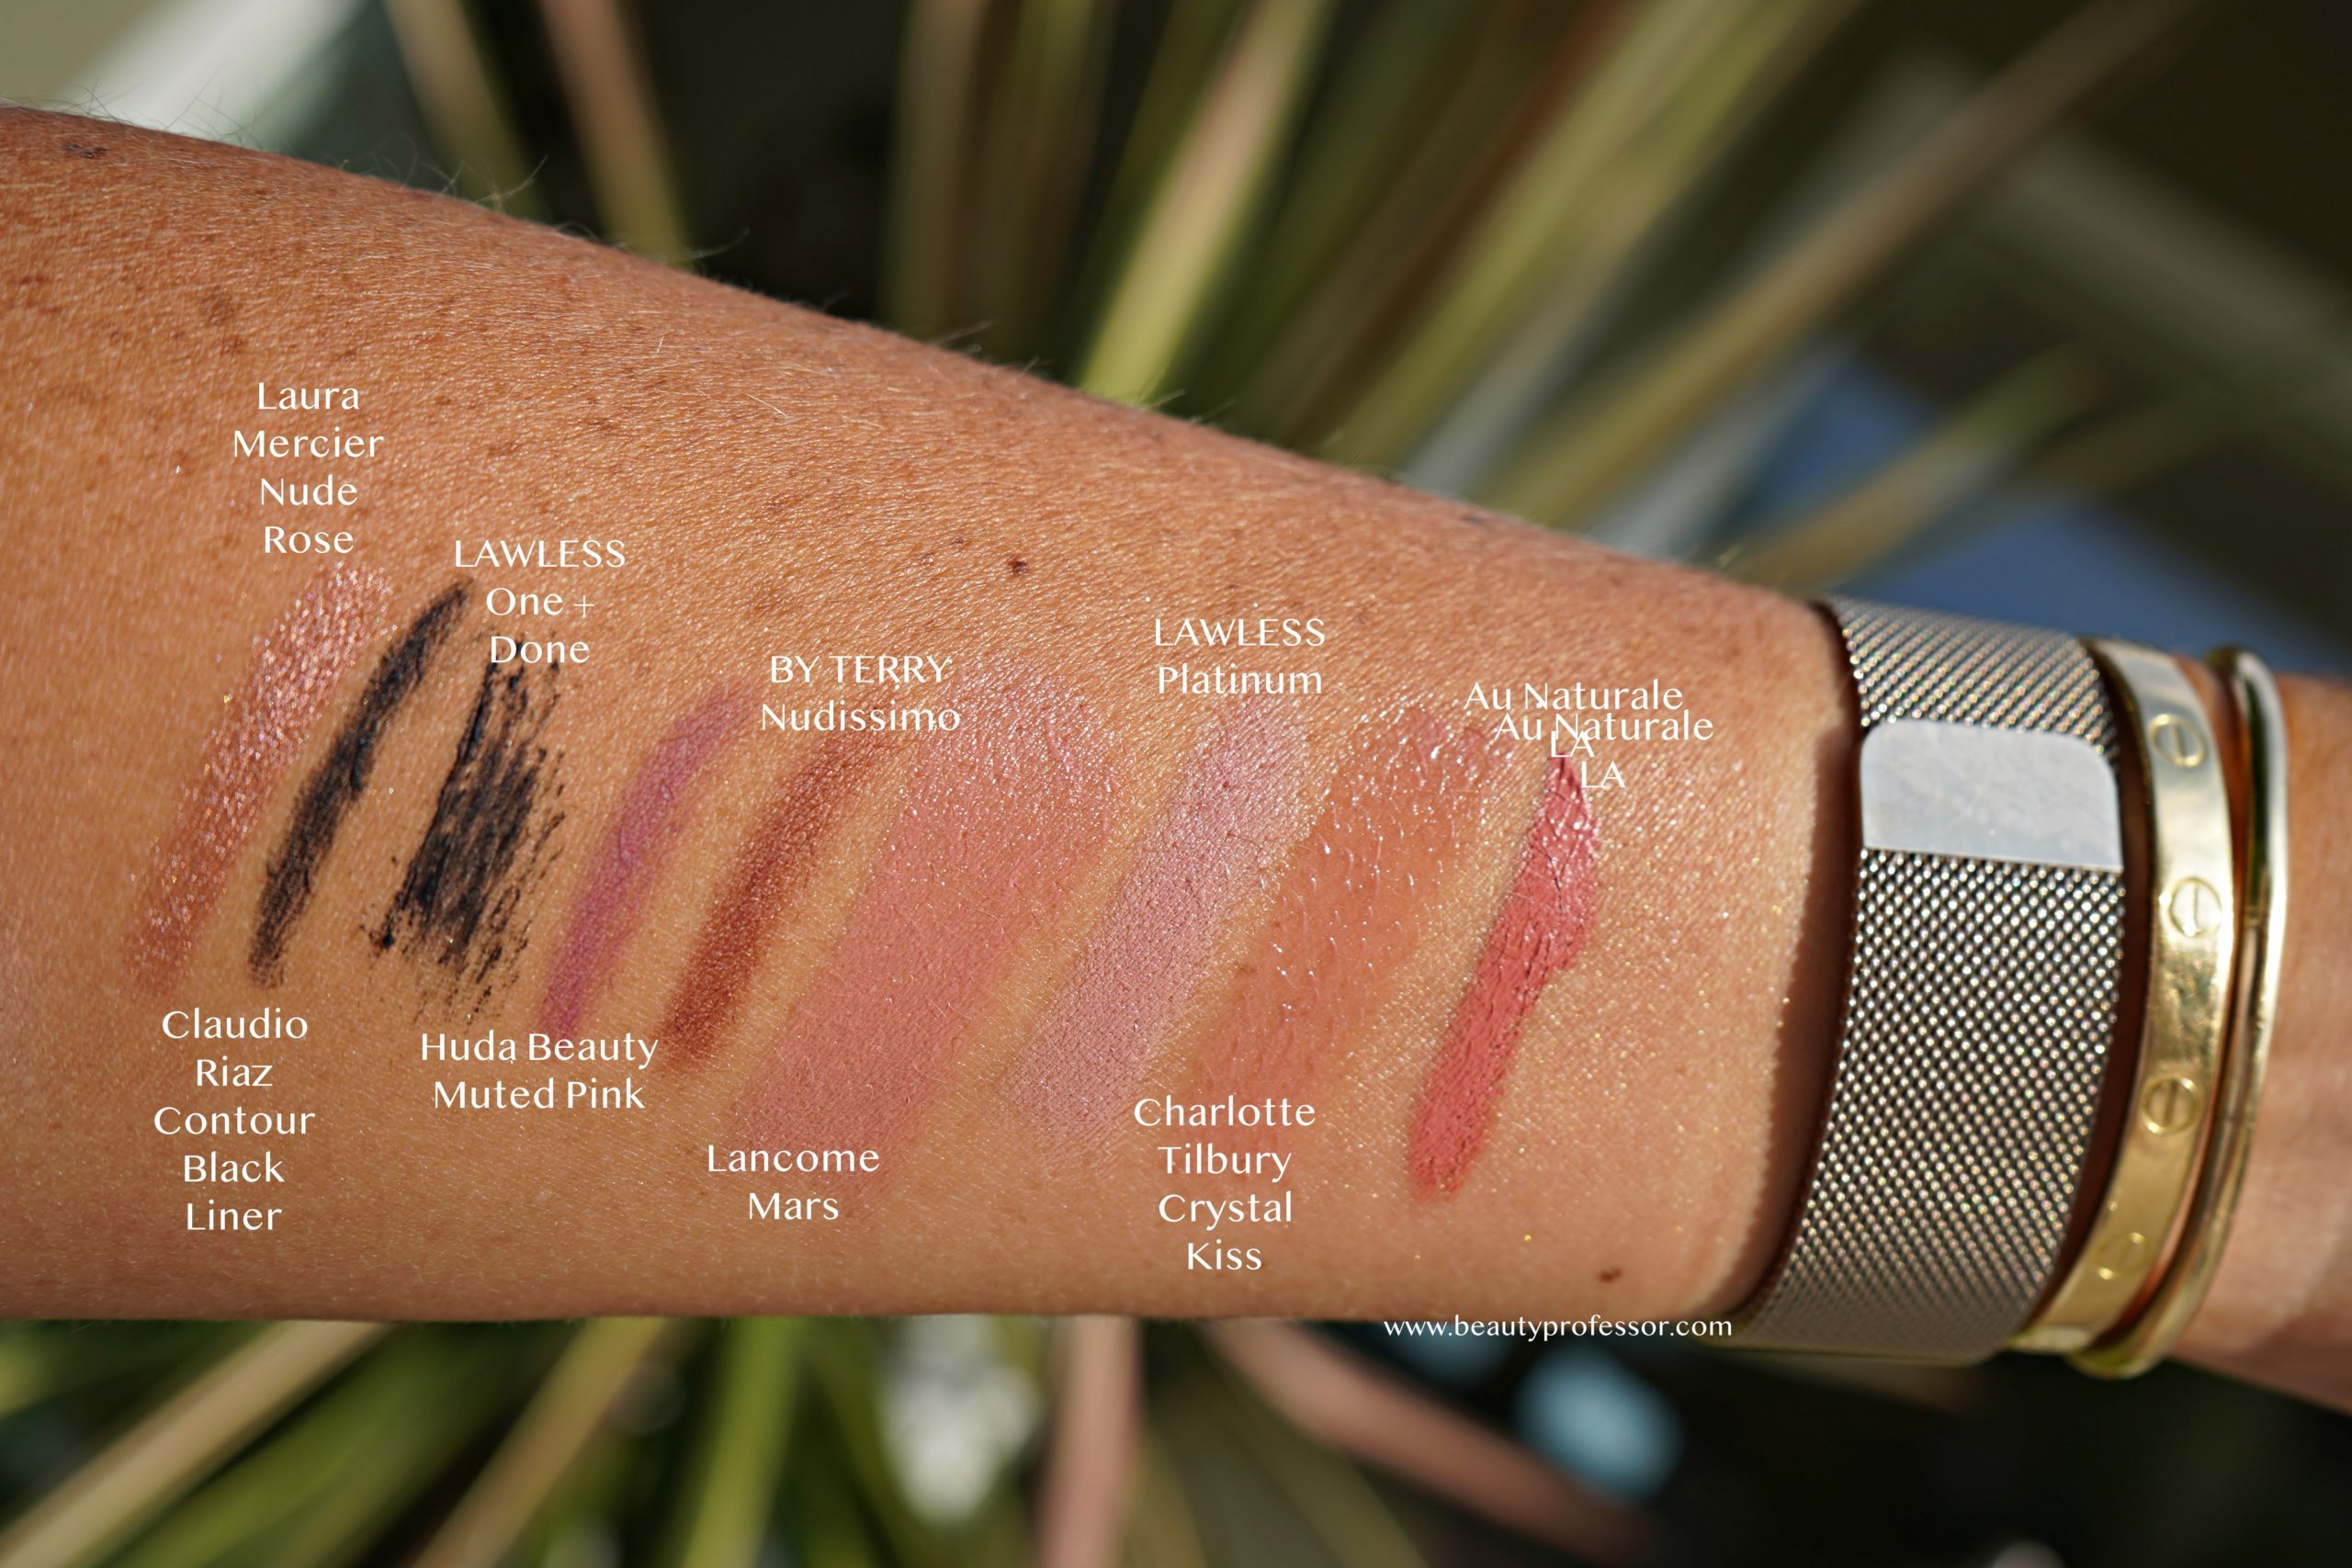 swatches of makeup for the lips and eyes